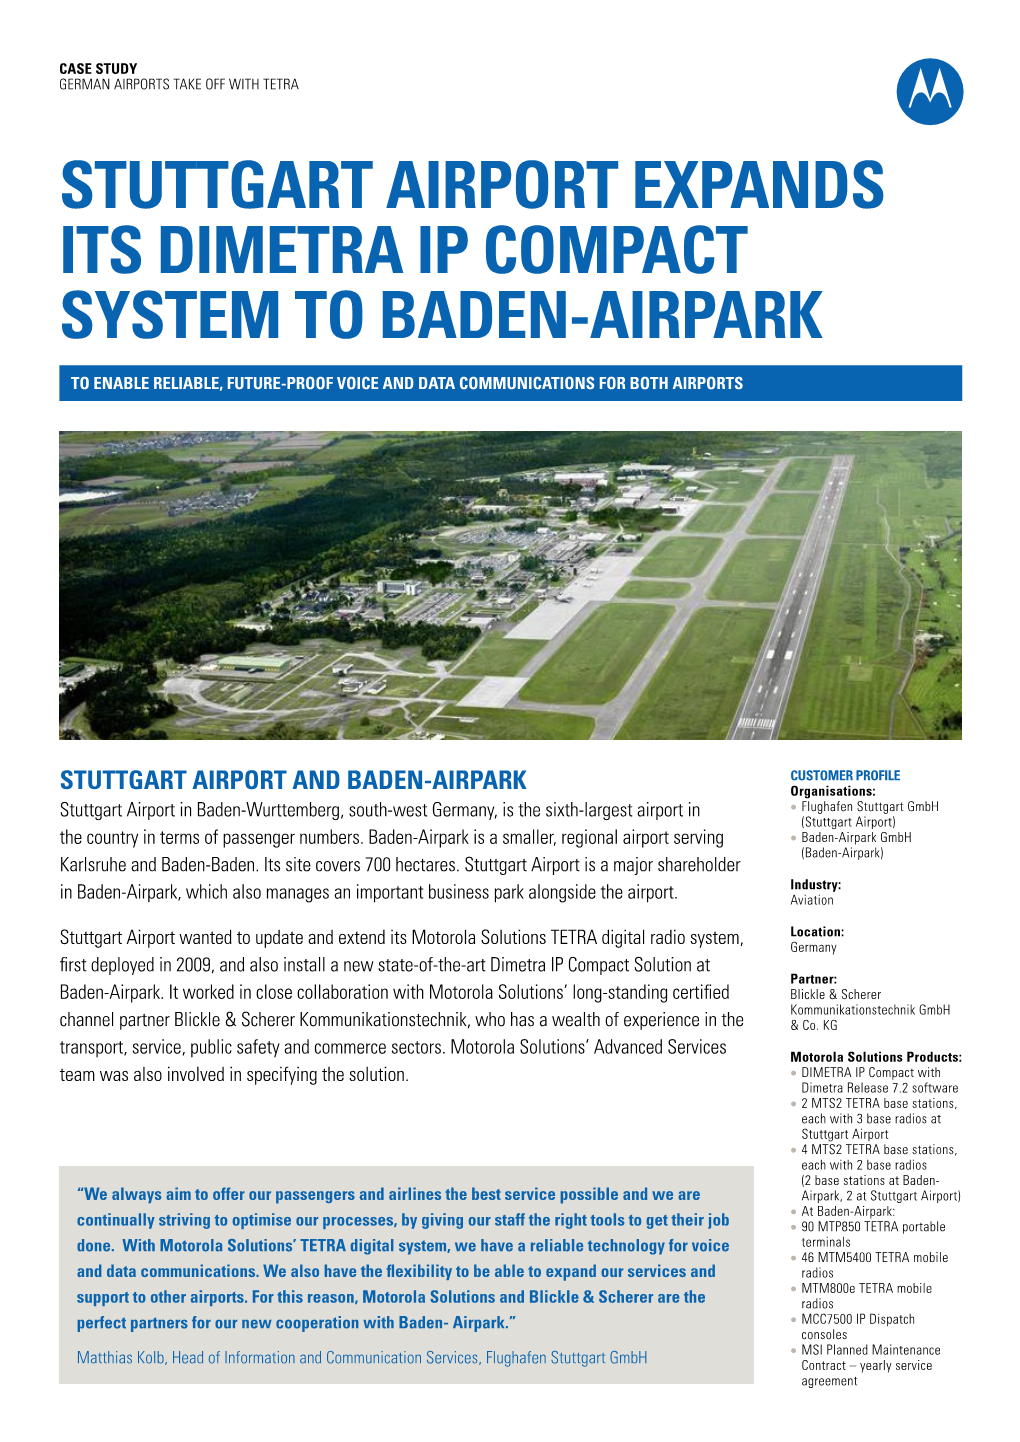 Stuttgart Airport Expands Its Dimetra Ip Compact System to Baden-Airpark